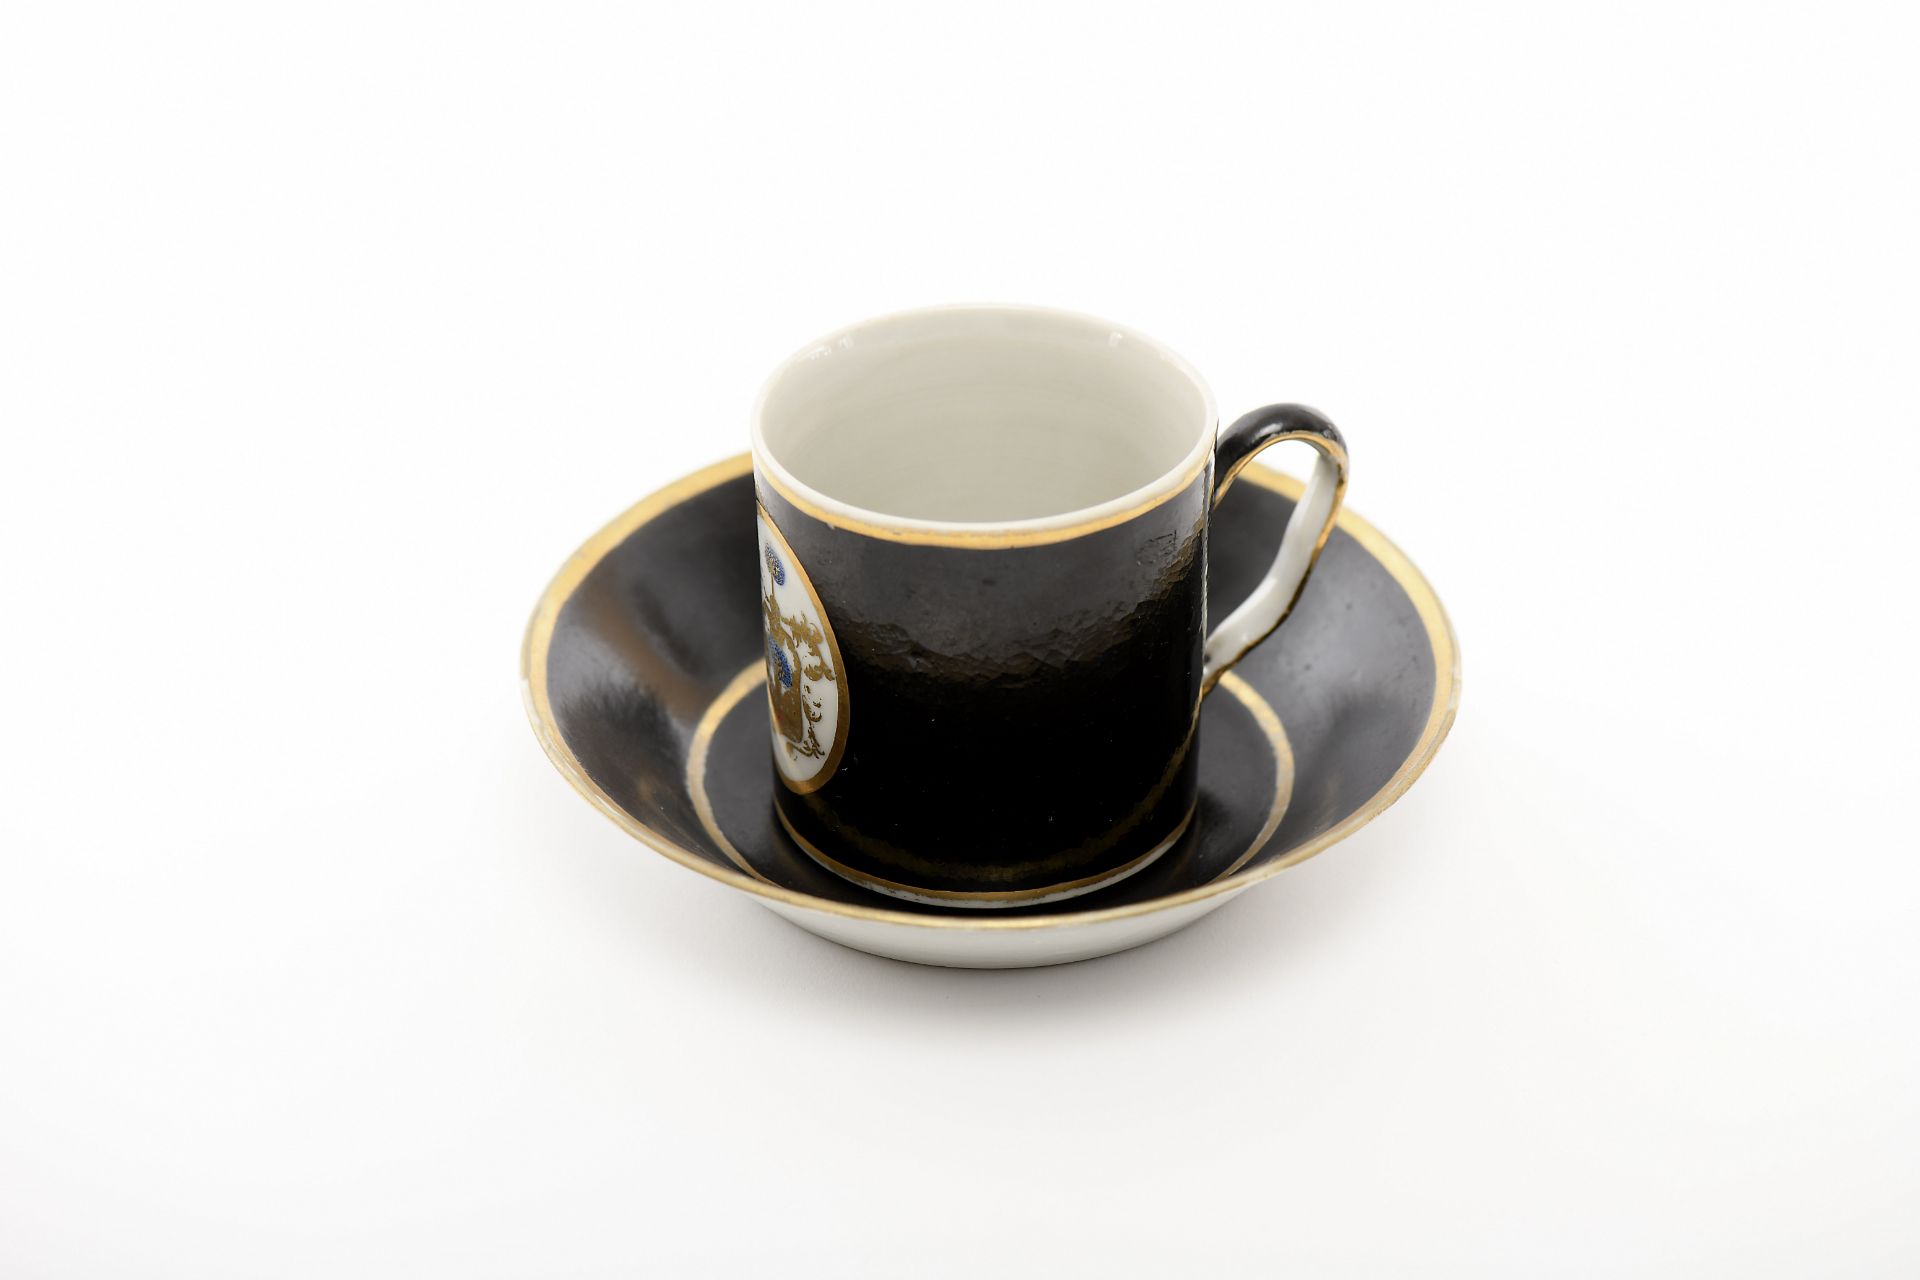 A cup with saucer - Image 2 of 4